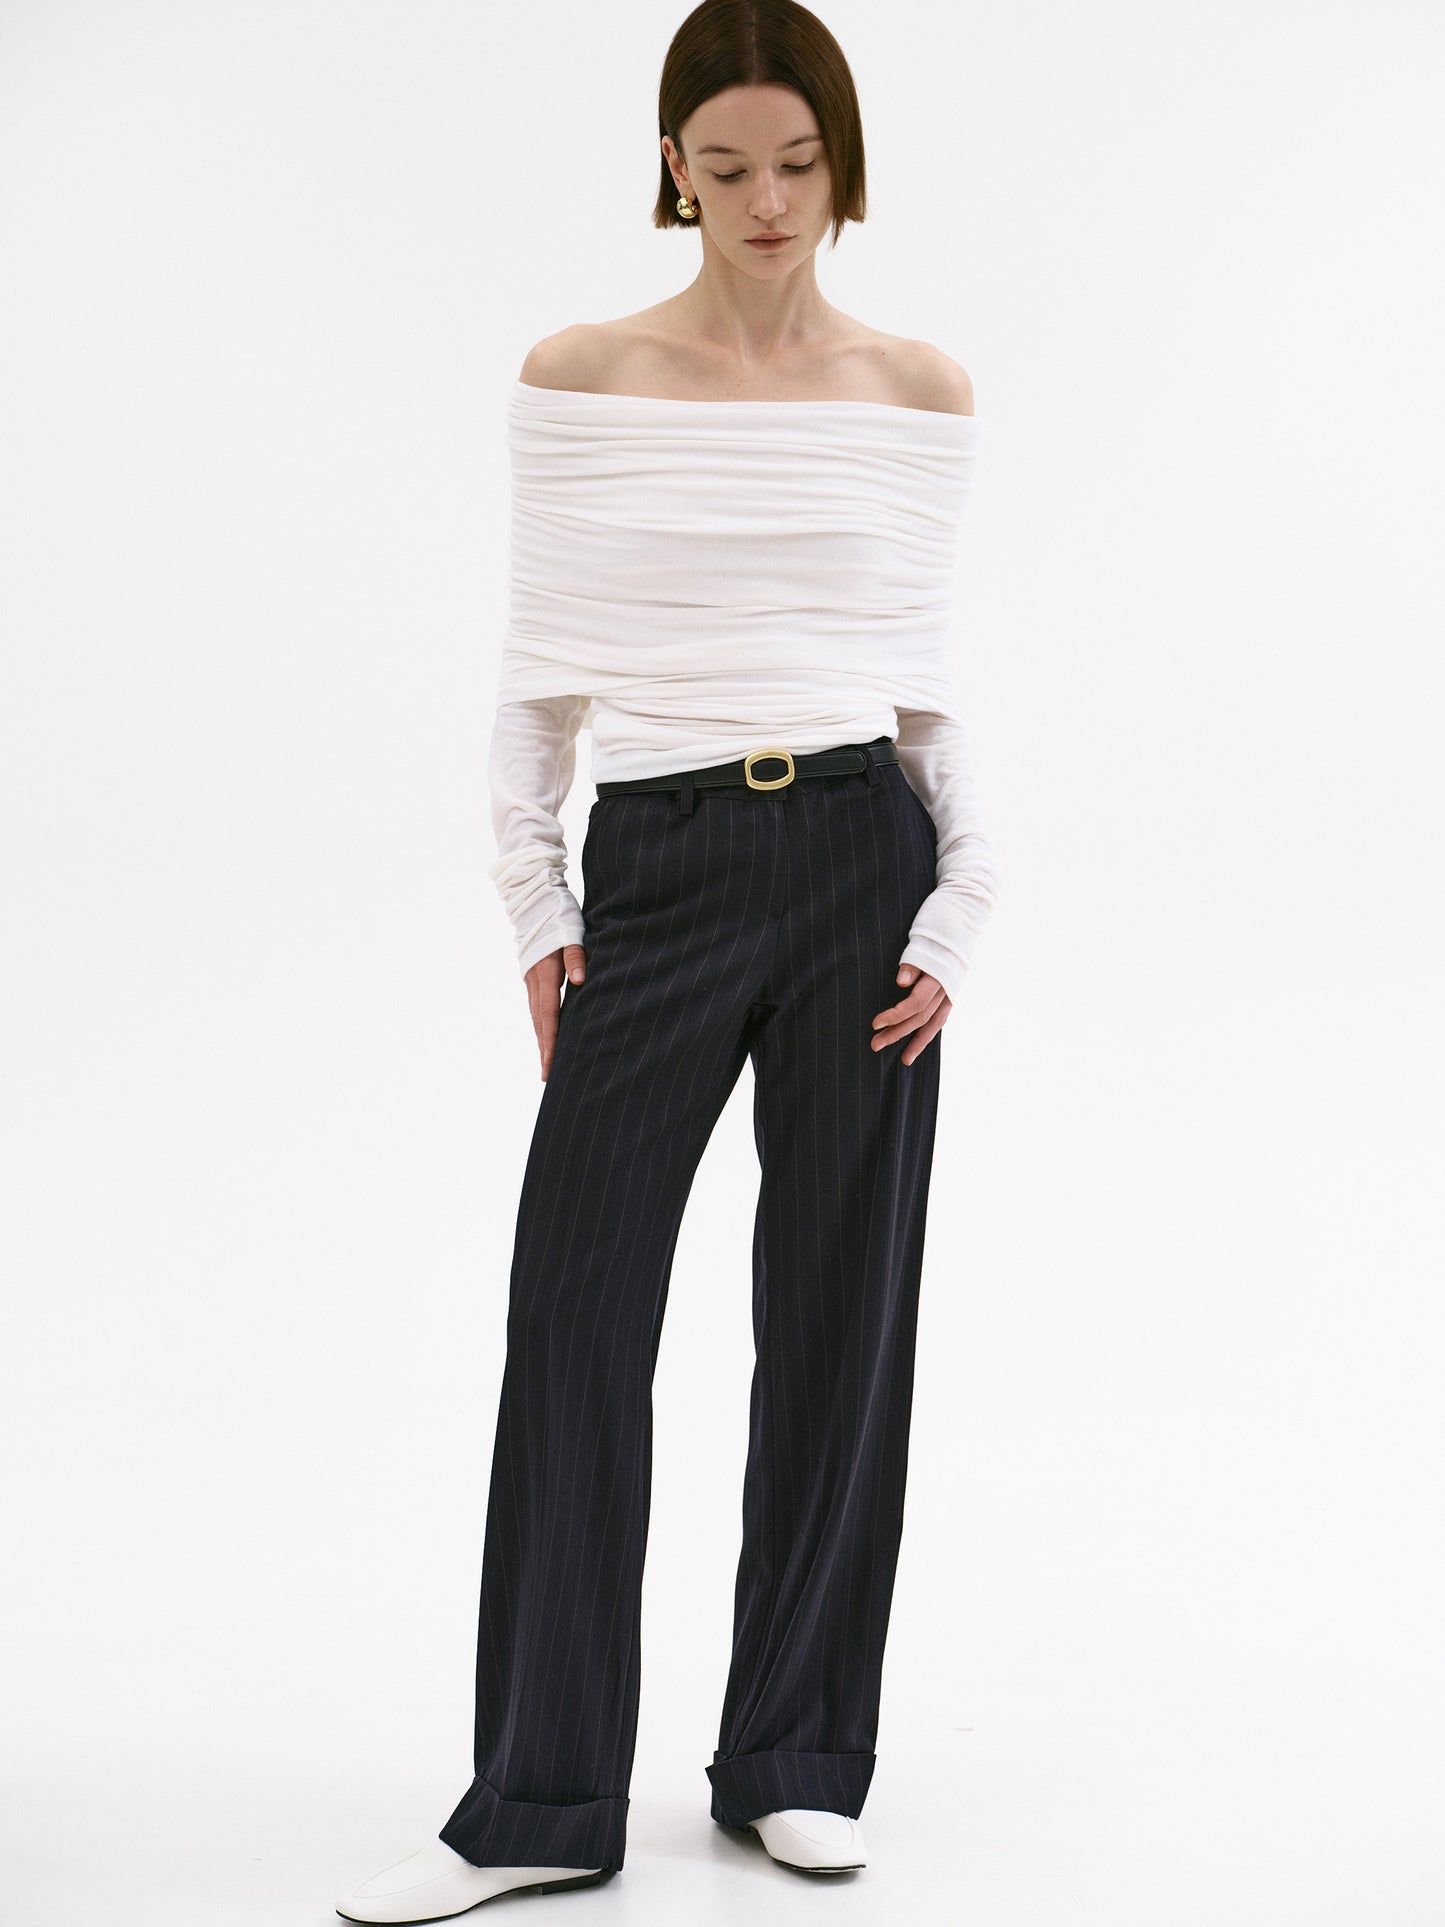 Deconstructed Off Shoulder Shirt + High Waist Pegged Pants (Style Pantry)